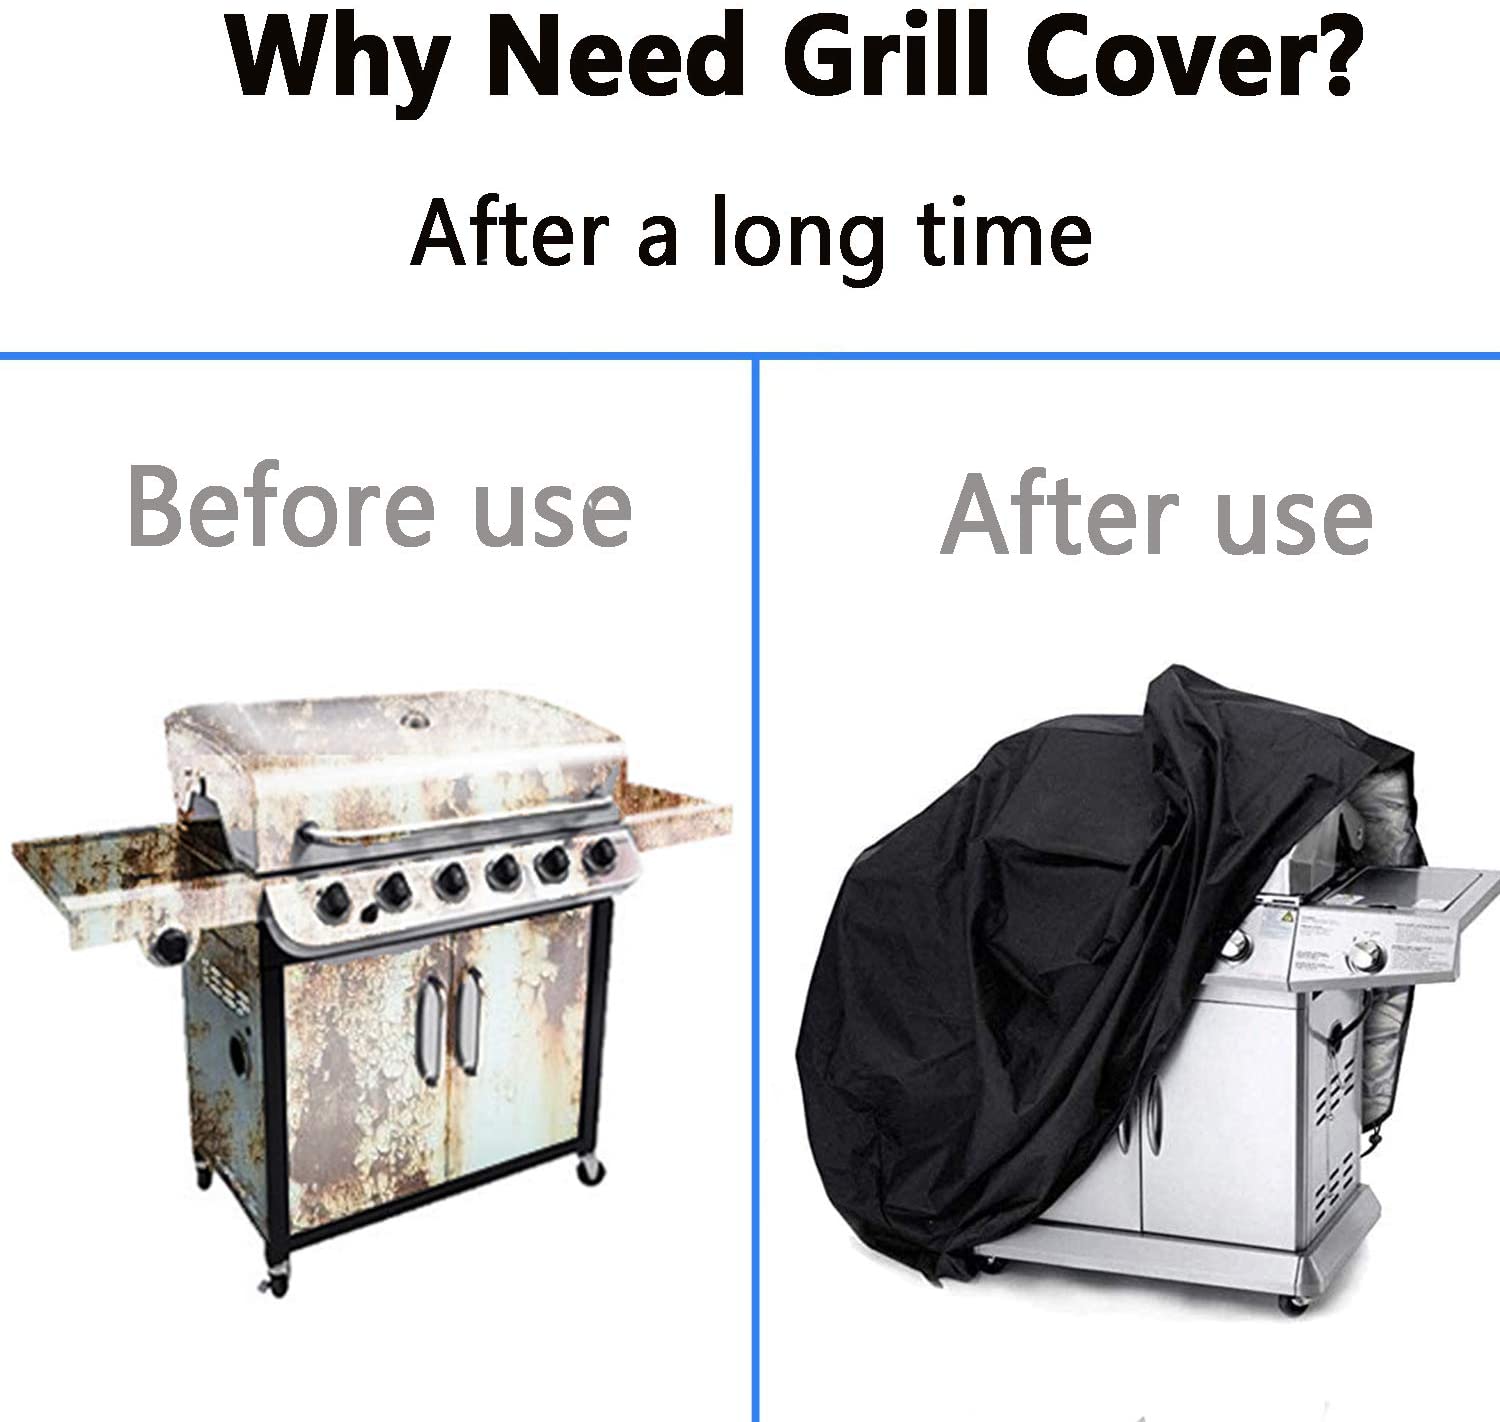 BBQ Grill Cover, 58-inch Waterproof Heavy-Duty Premium BBQ Grill Cover Gas Barbeque Grill Cover -Large((L:58" W: 24" H:46") Black - image 4 of 8